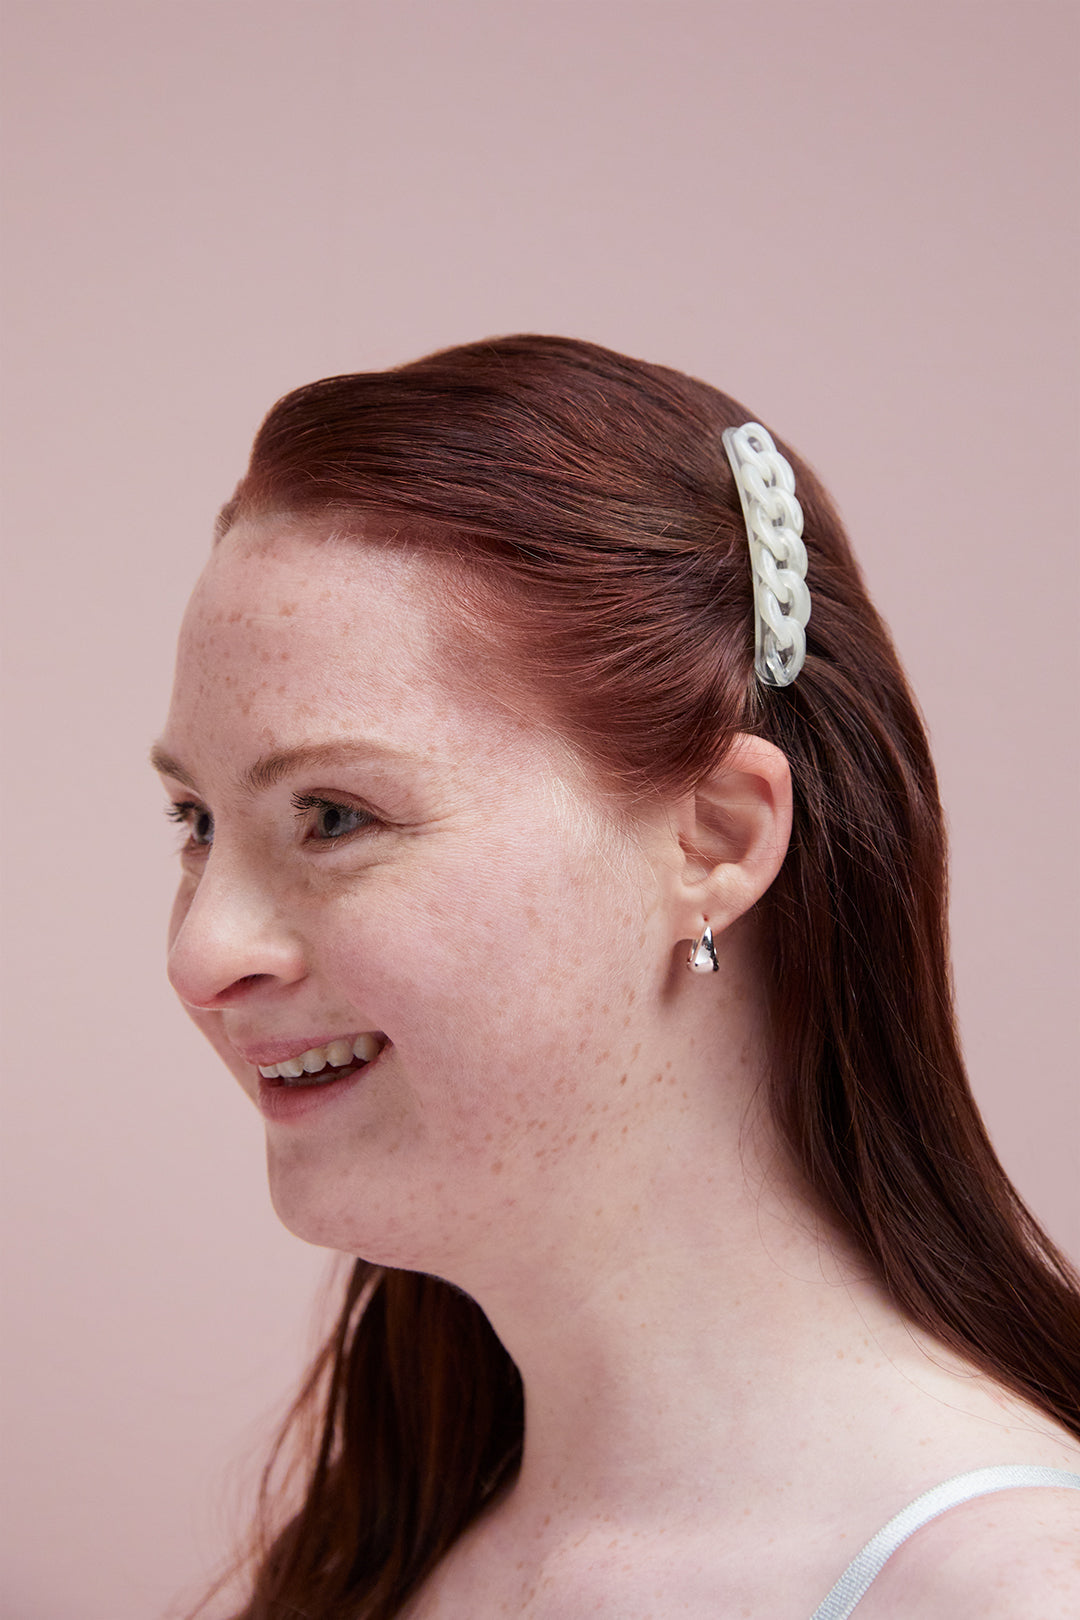  Invisibobble Barrette: No-metal, HAIRLOVETECH clips for chic styles. Stack for instant glam! Premium hold, no springs.